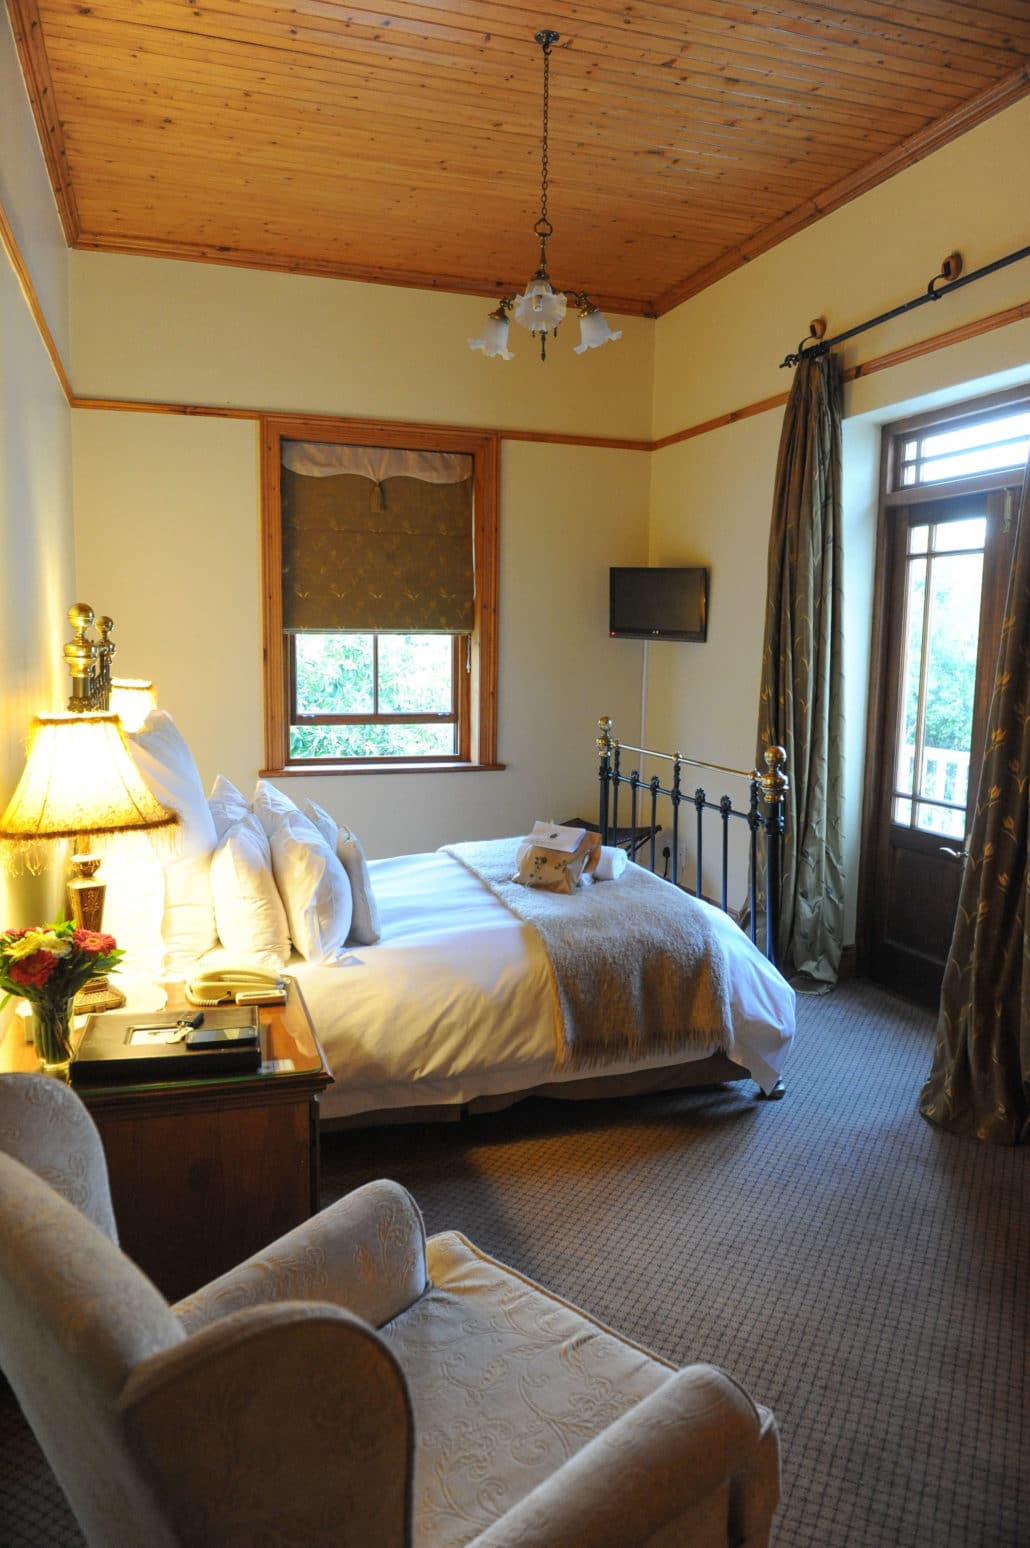 My room at the Evergreen Manor and Spa in Stellenbosch